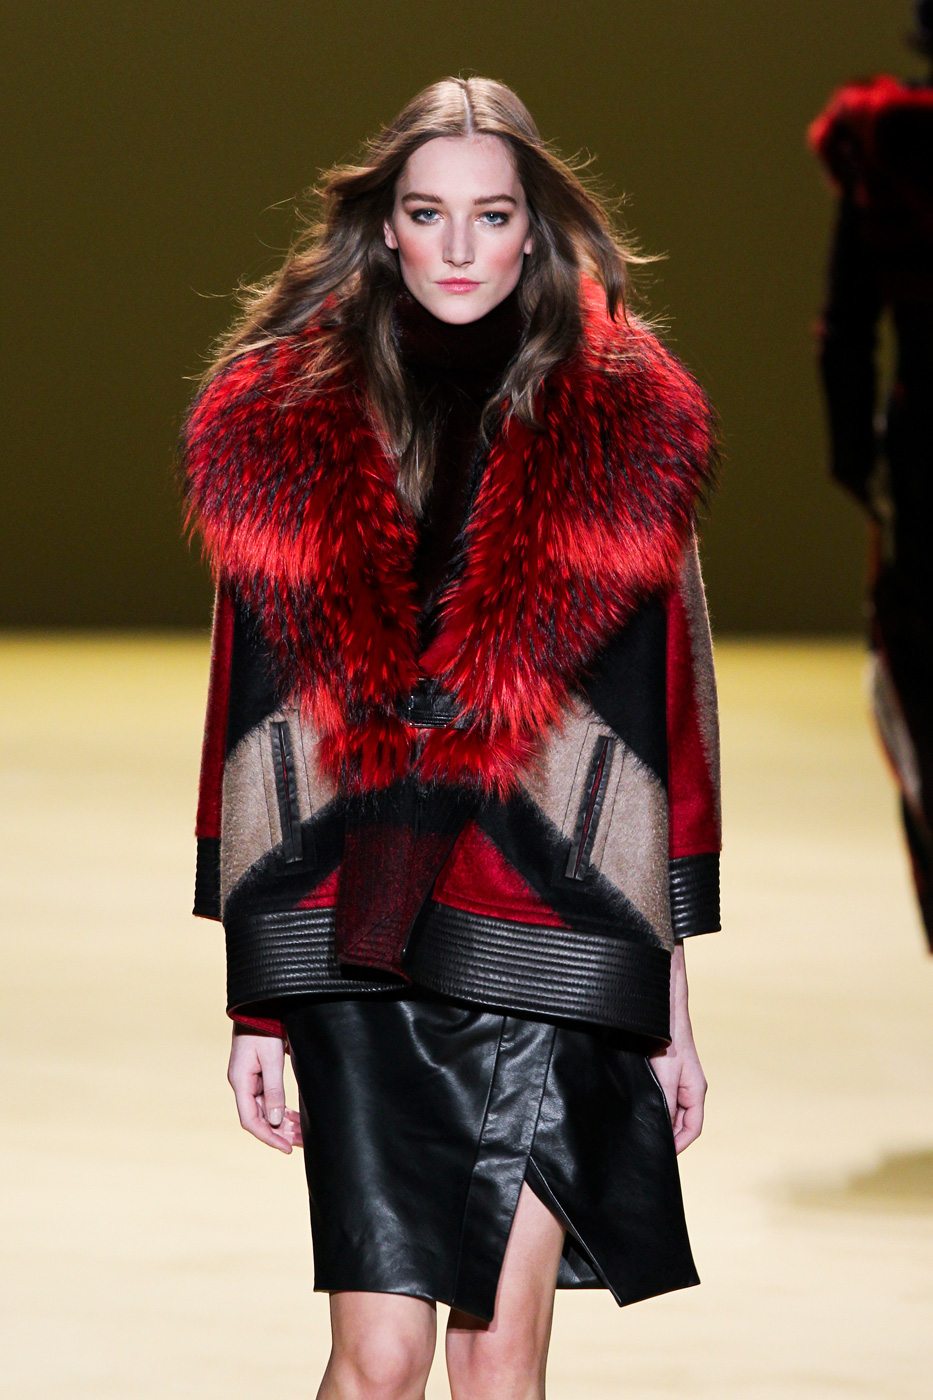 Top 10 Fashion Trends of Fall 2014 - theFashionSpot